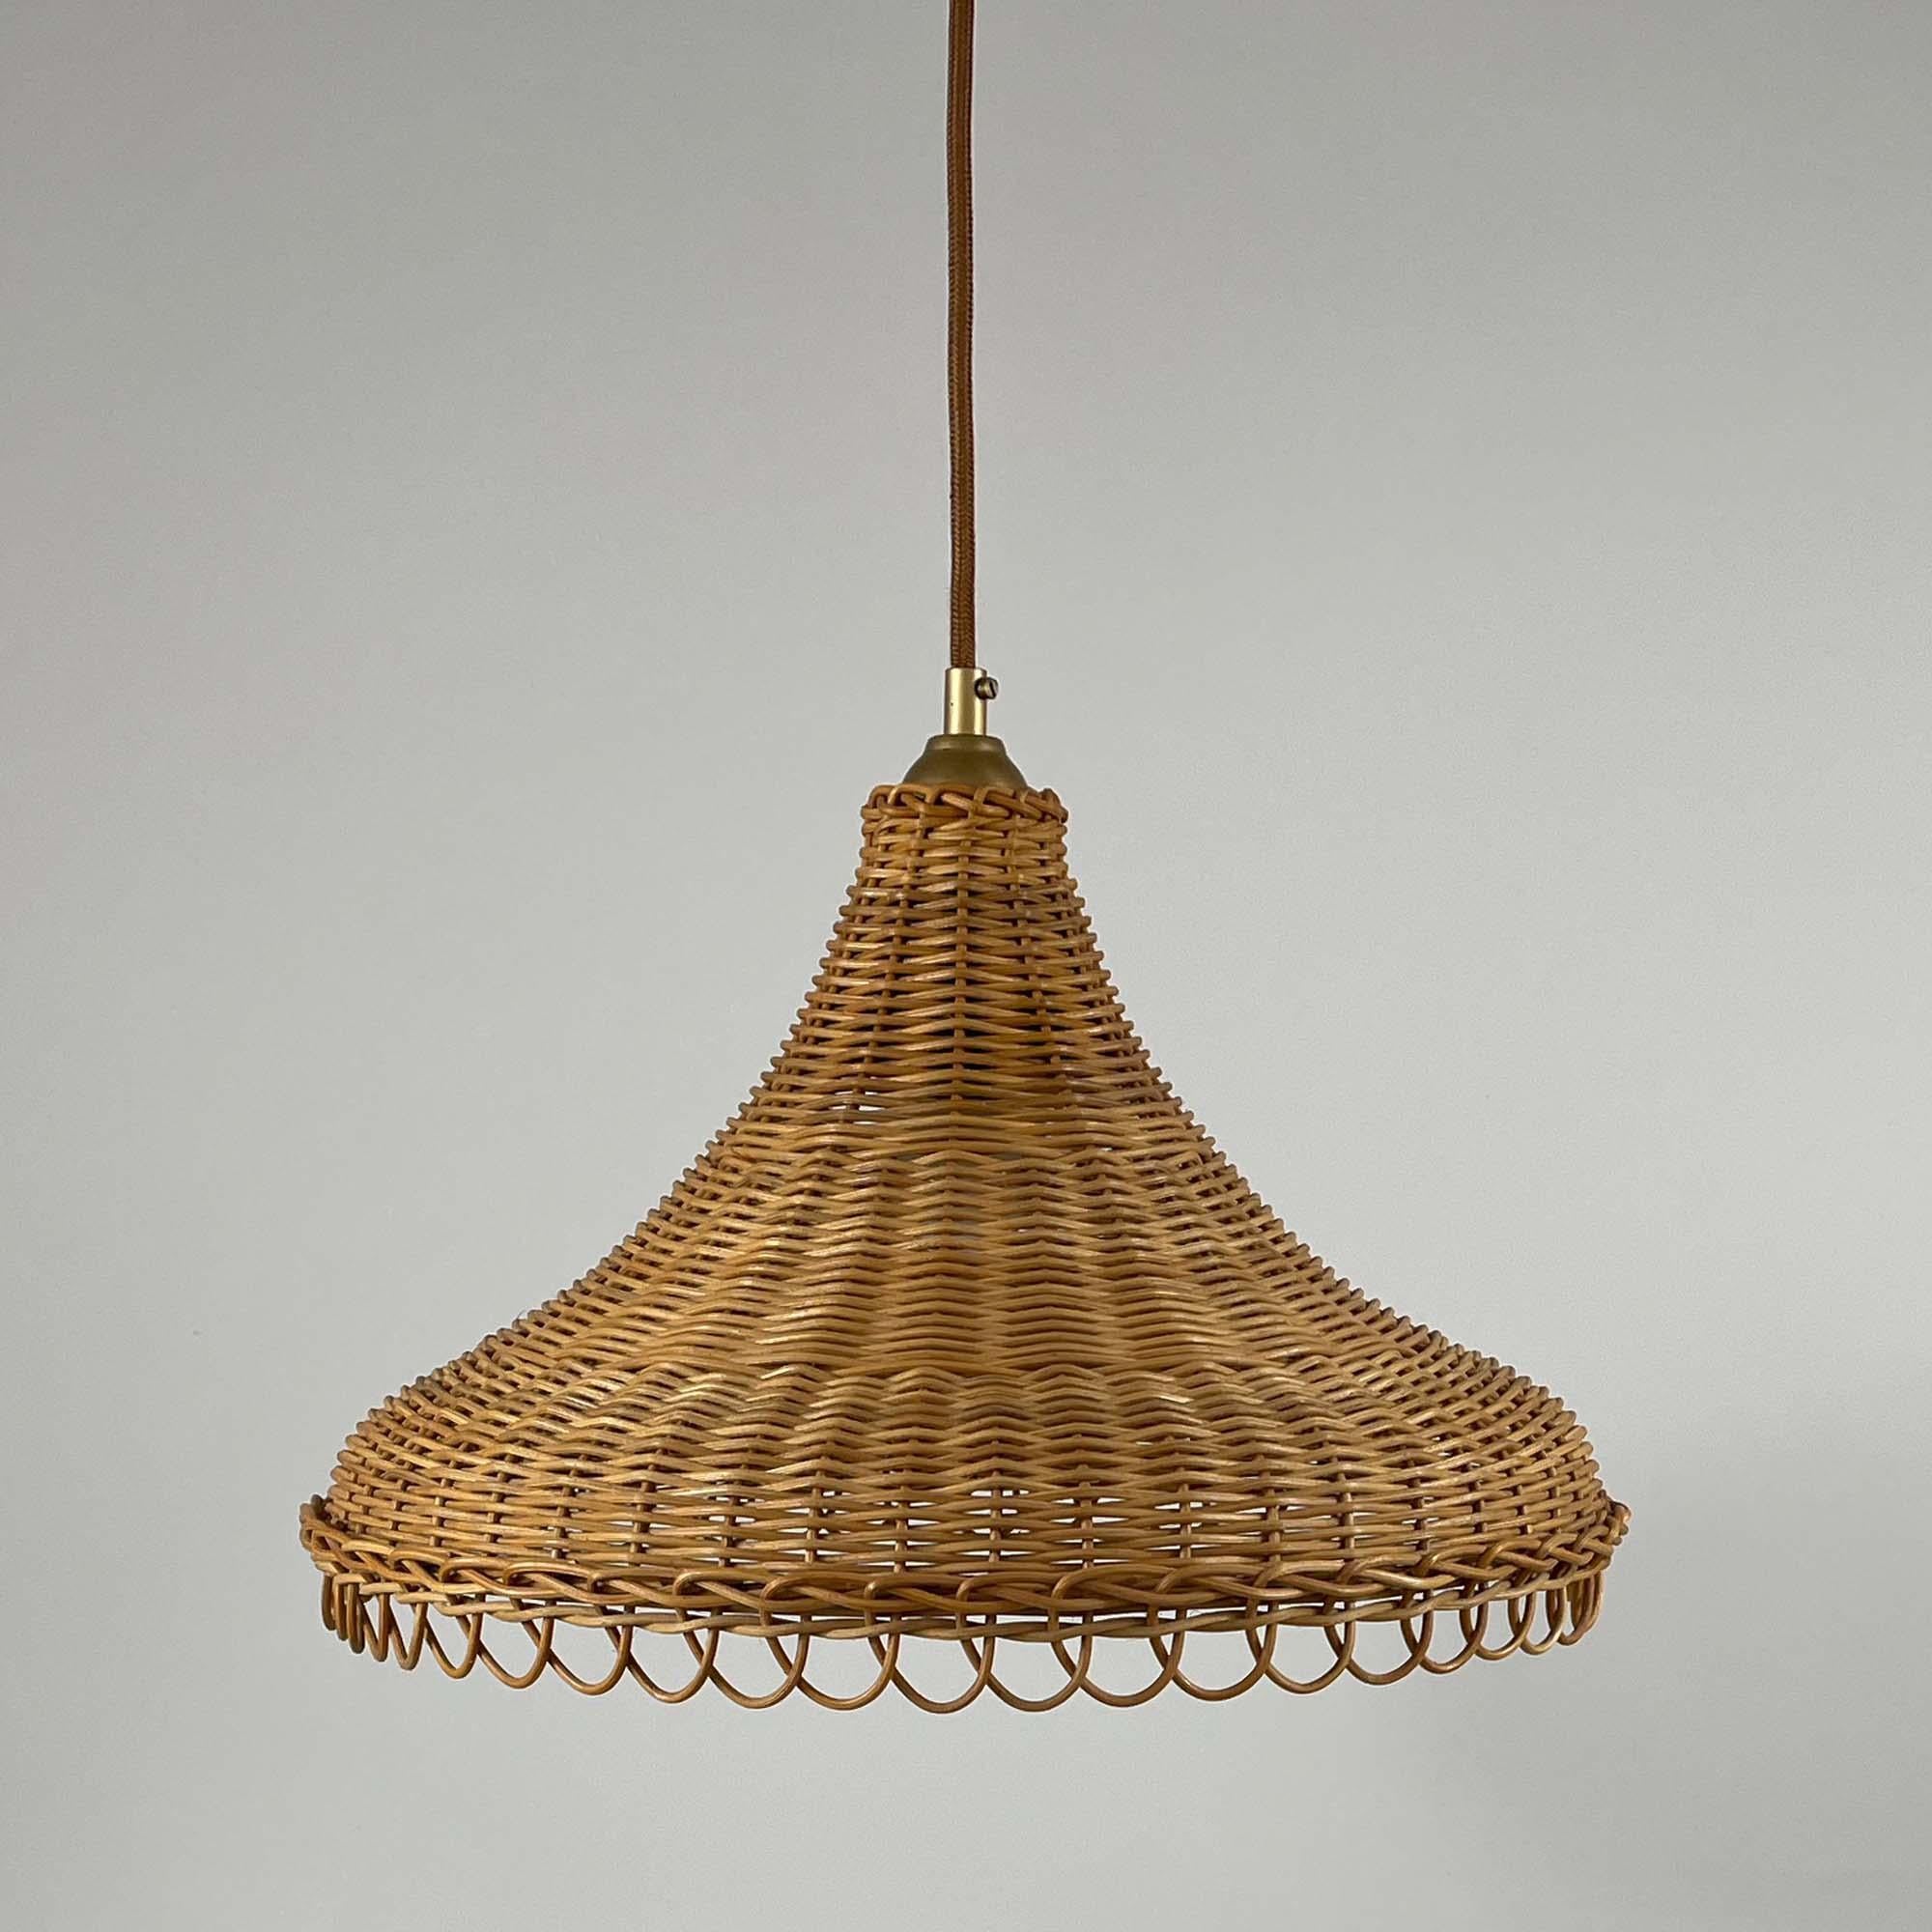 This rattan pendant or suspension light was designed and manufactured in Italy in the 1960s. It features a large tulip shaped lampshade, brown fabric cord and a rattan canopy.

The light has been rewired for use in US and any other country of the